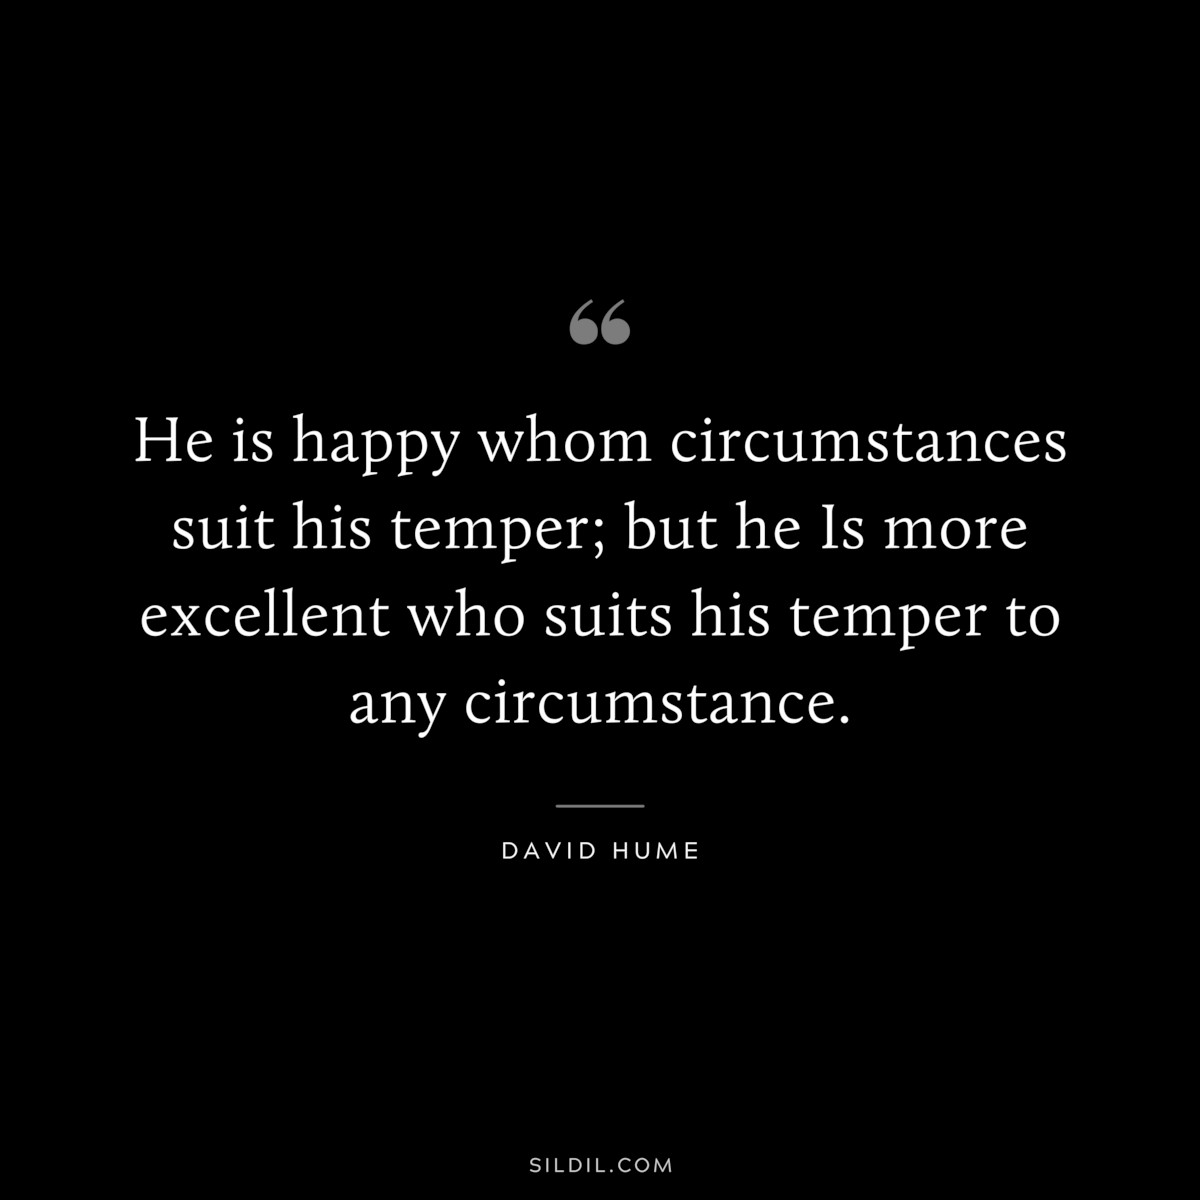 He is happy whom circumstances suit his temper; but he Is more excellent who suits his temper to any circumstance. ― David Hume